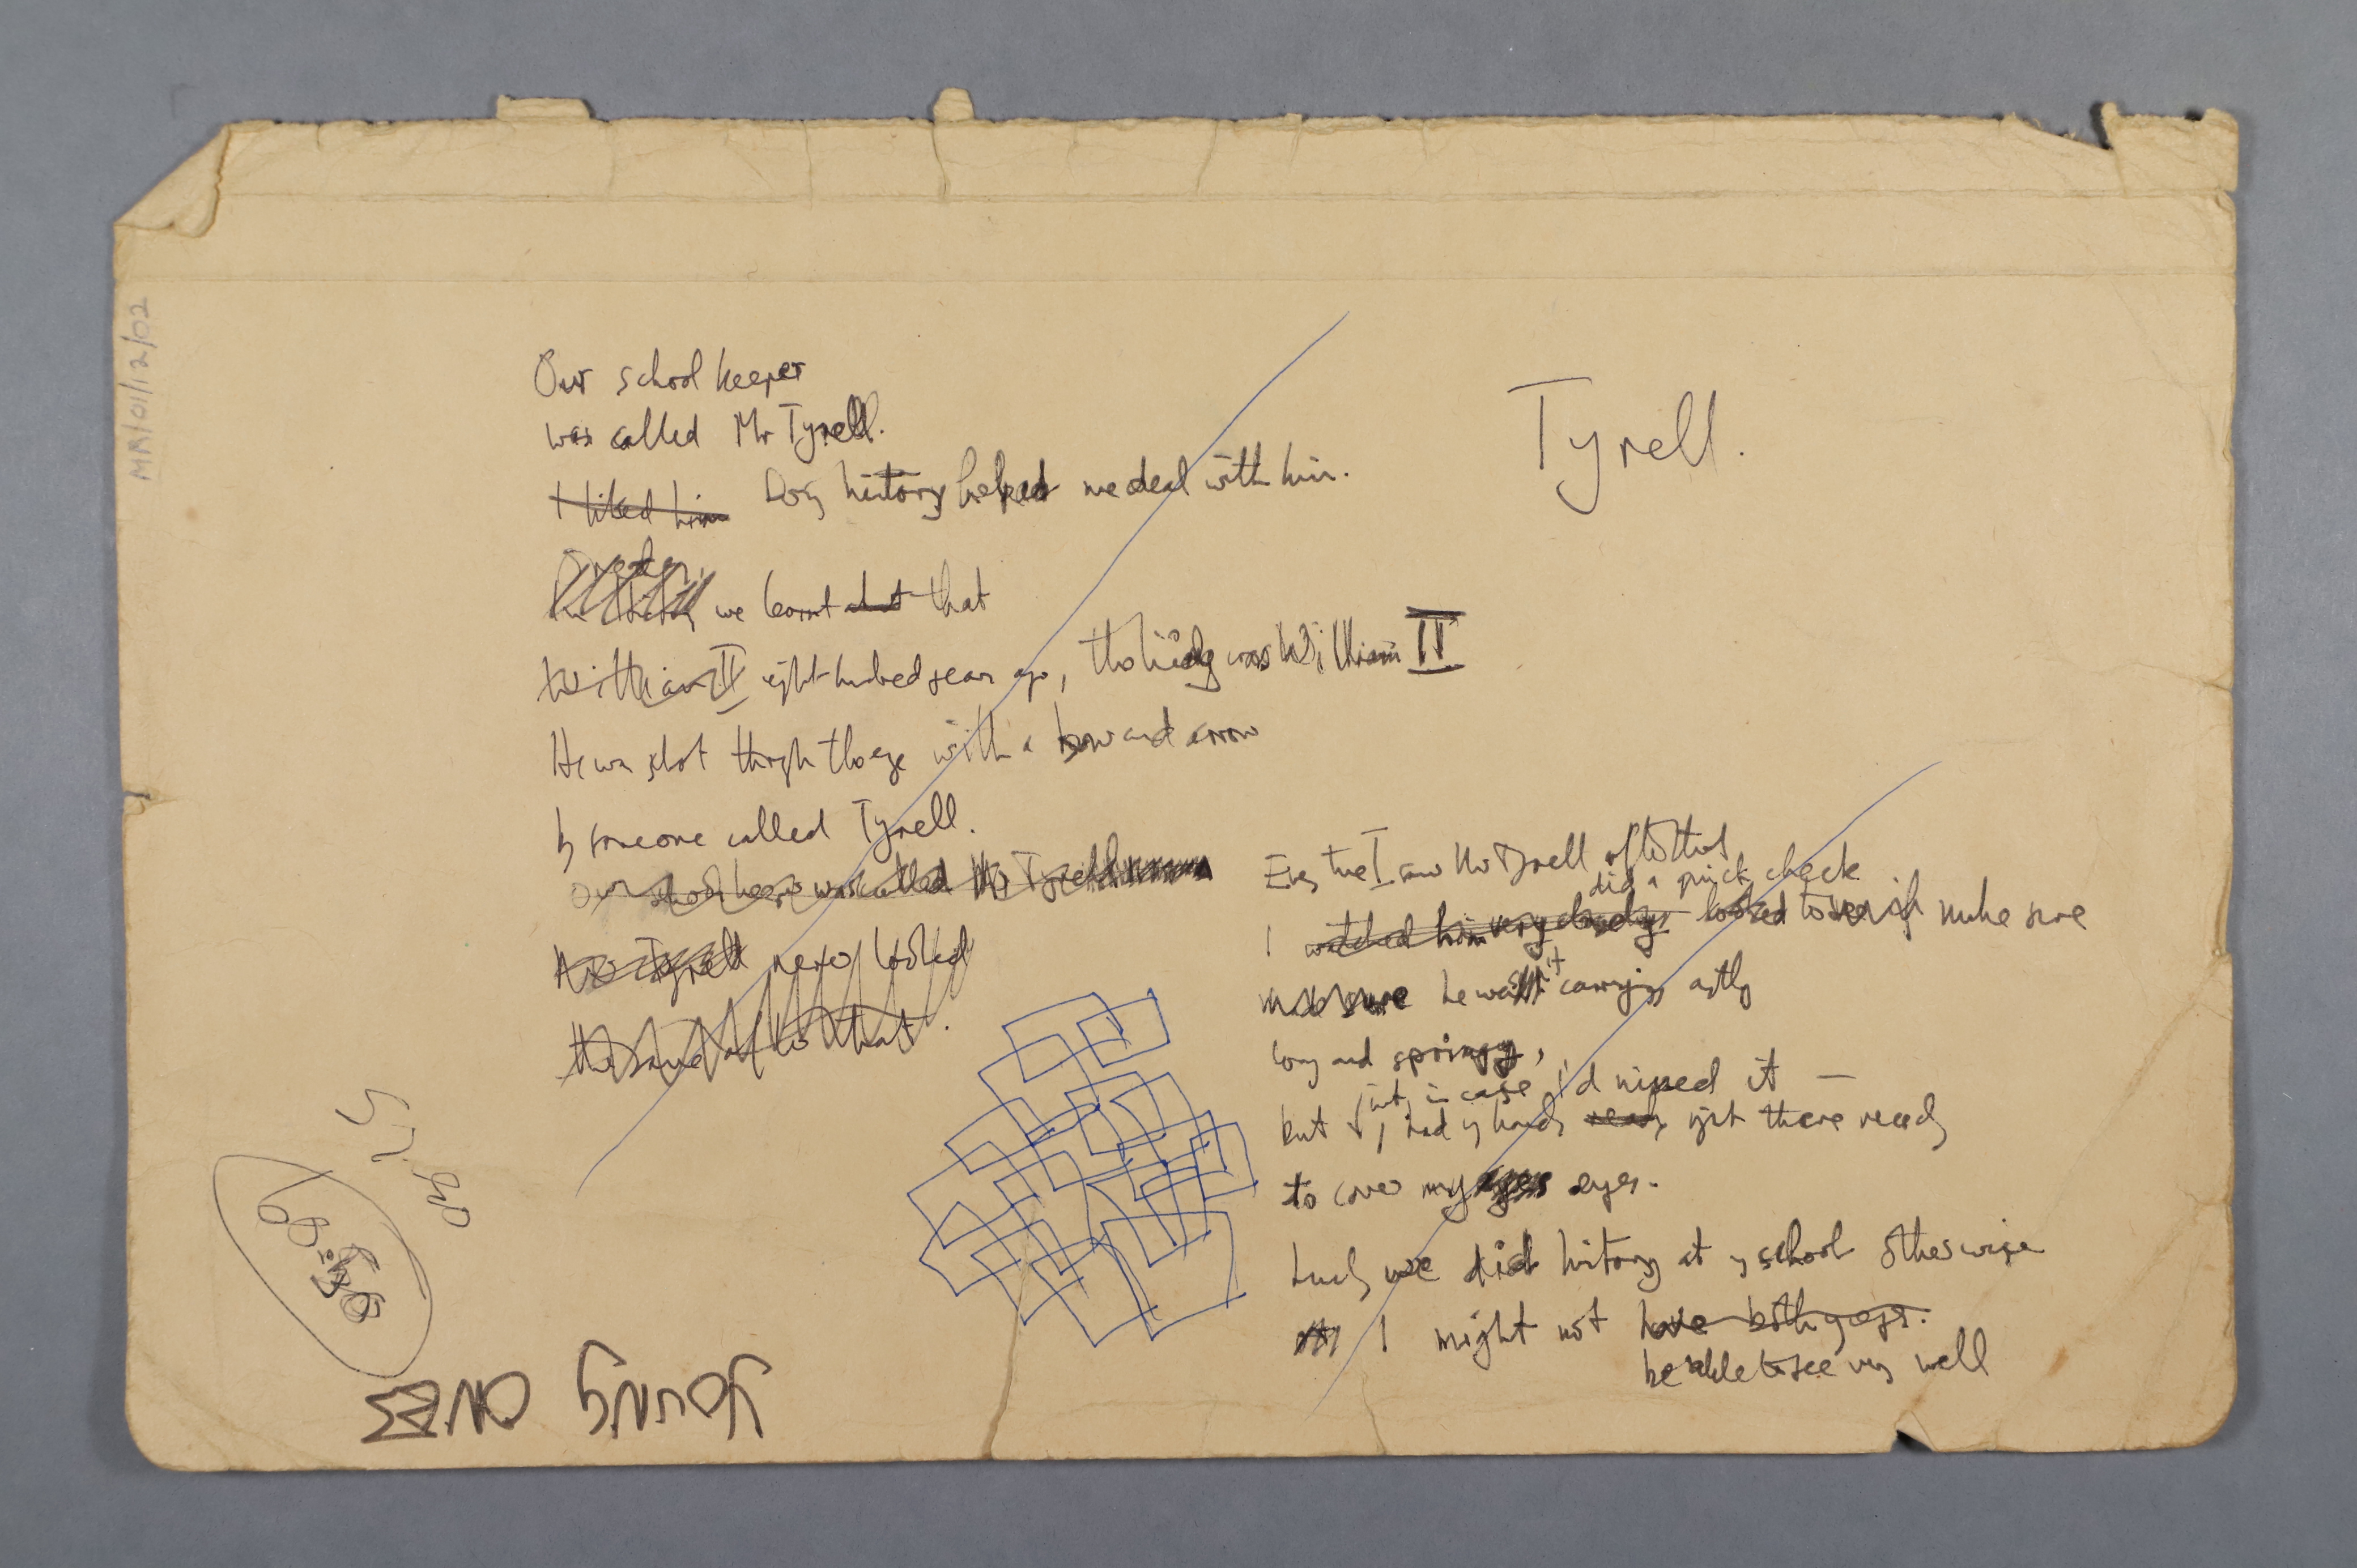 A manuscript draft of a poem on a scrap of paper in black ink, crossed out in blue ink.